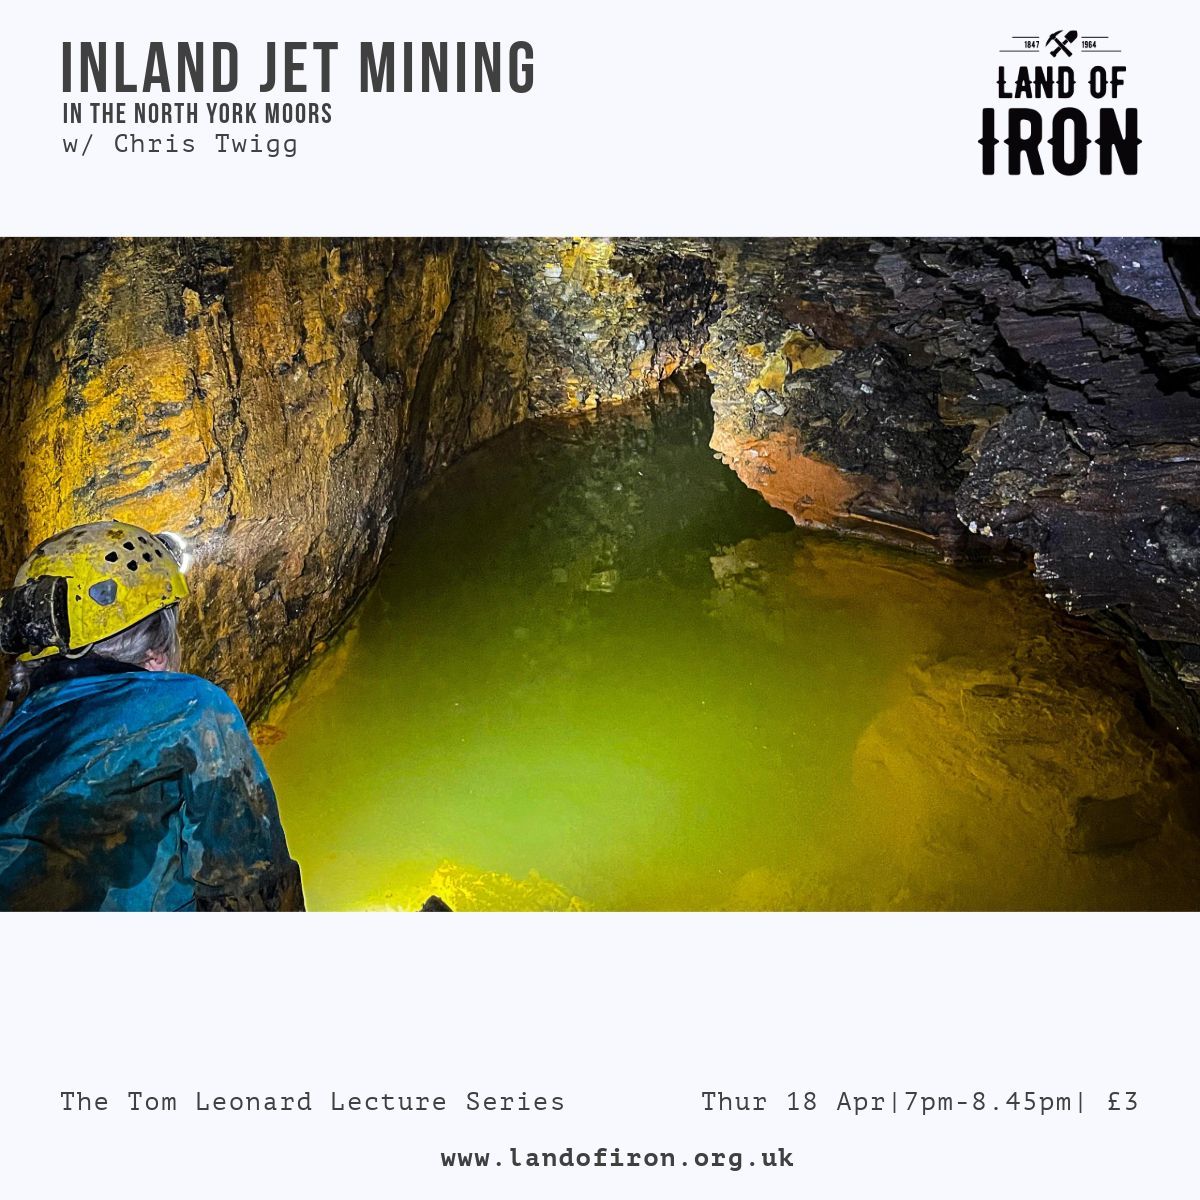 Only 10 tickets remaining for this Thursday's talk on Inland Jet Mining with Chris Twigg. Get 'em while you can. If they all sell in advance, there will not be any for sale on the door. 🎟️ buff.ly/3J5lMOV